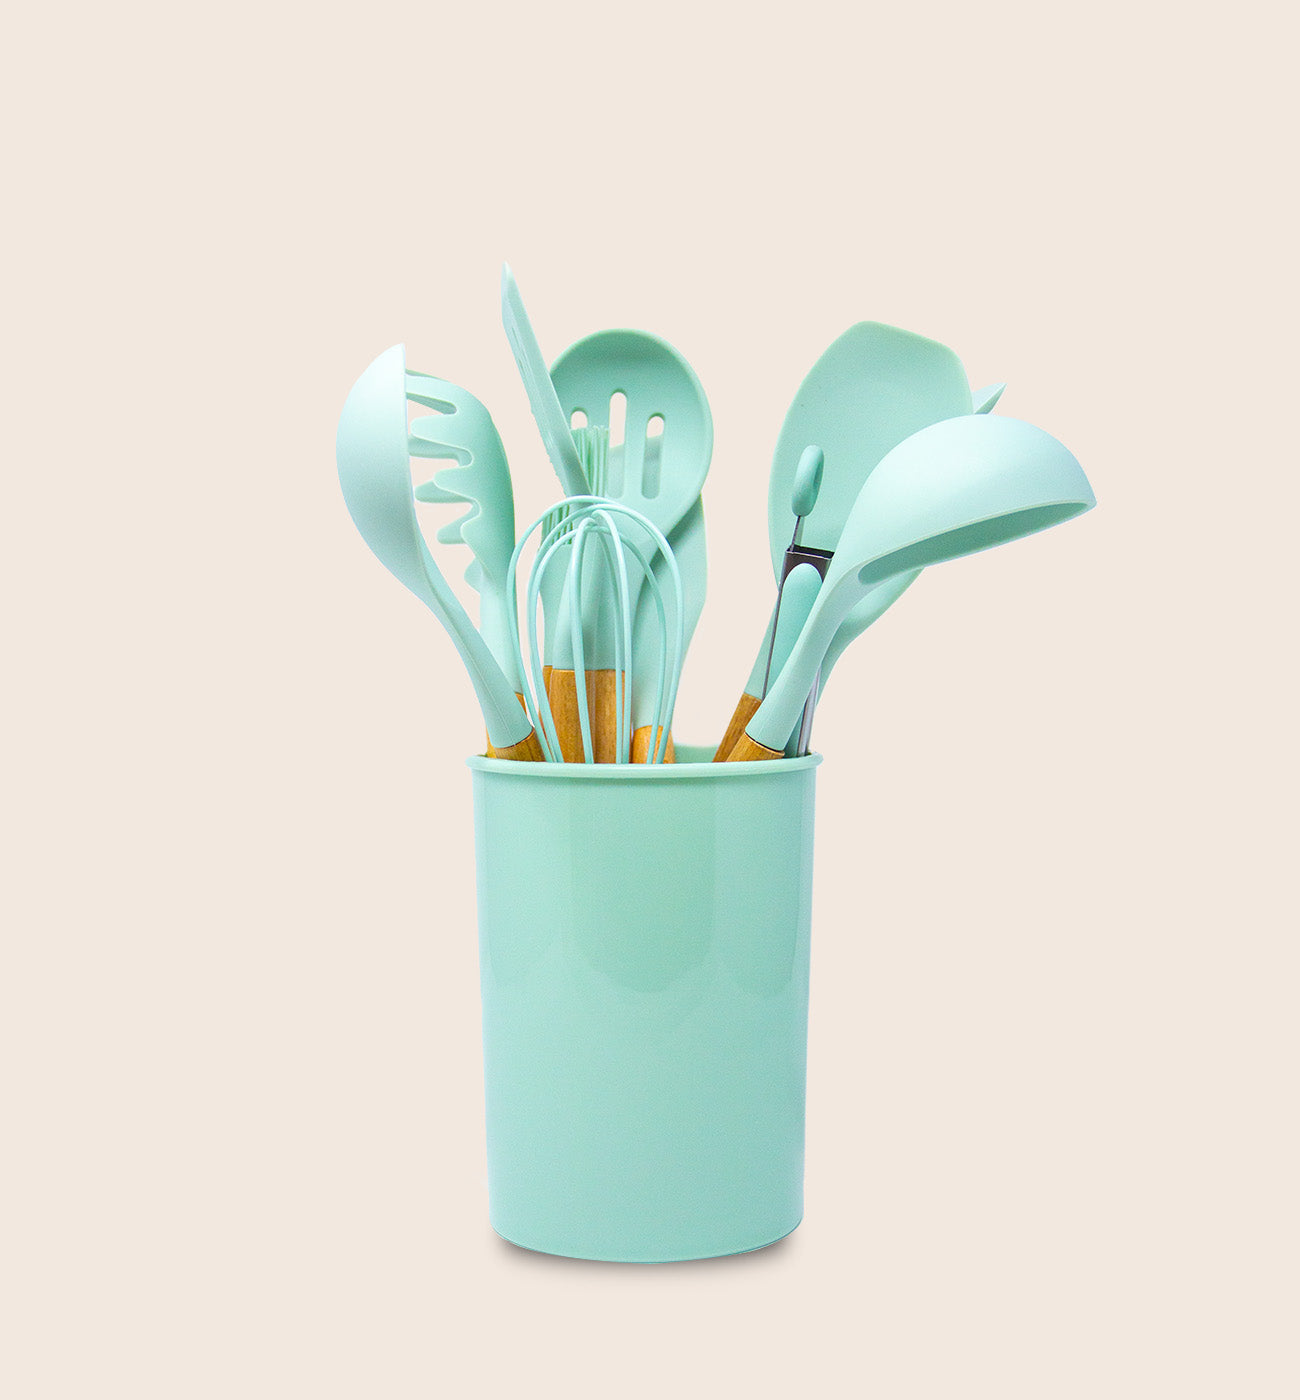 Silicone Cooking Utensils Set - Heat Resistant Kitchen Utensils, 19 Pieces  Kitchen Utensil Set, Green